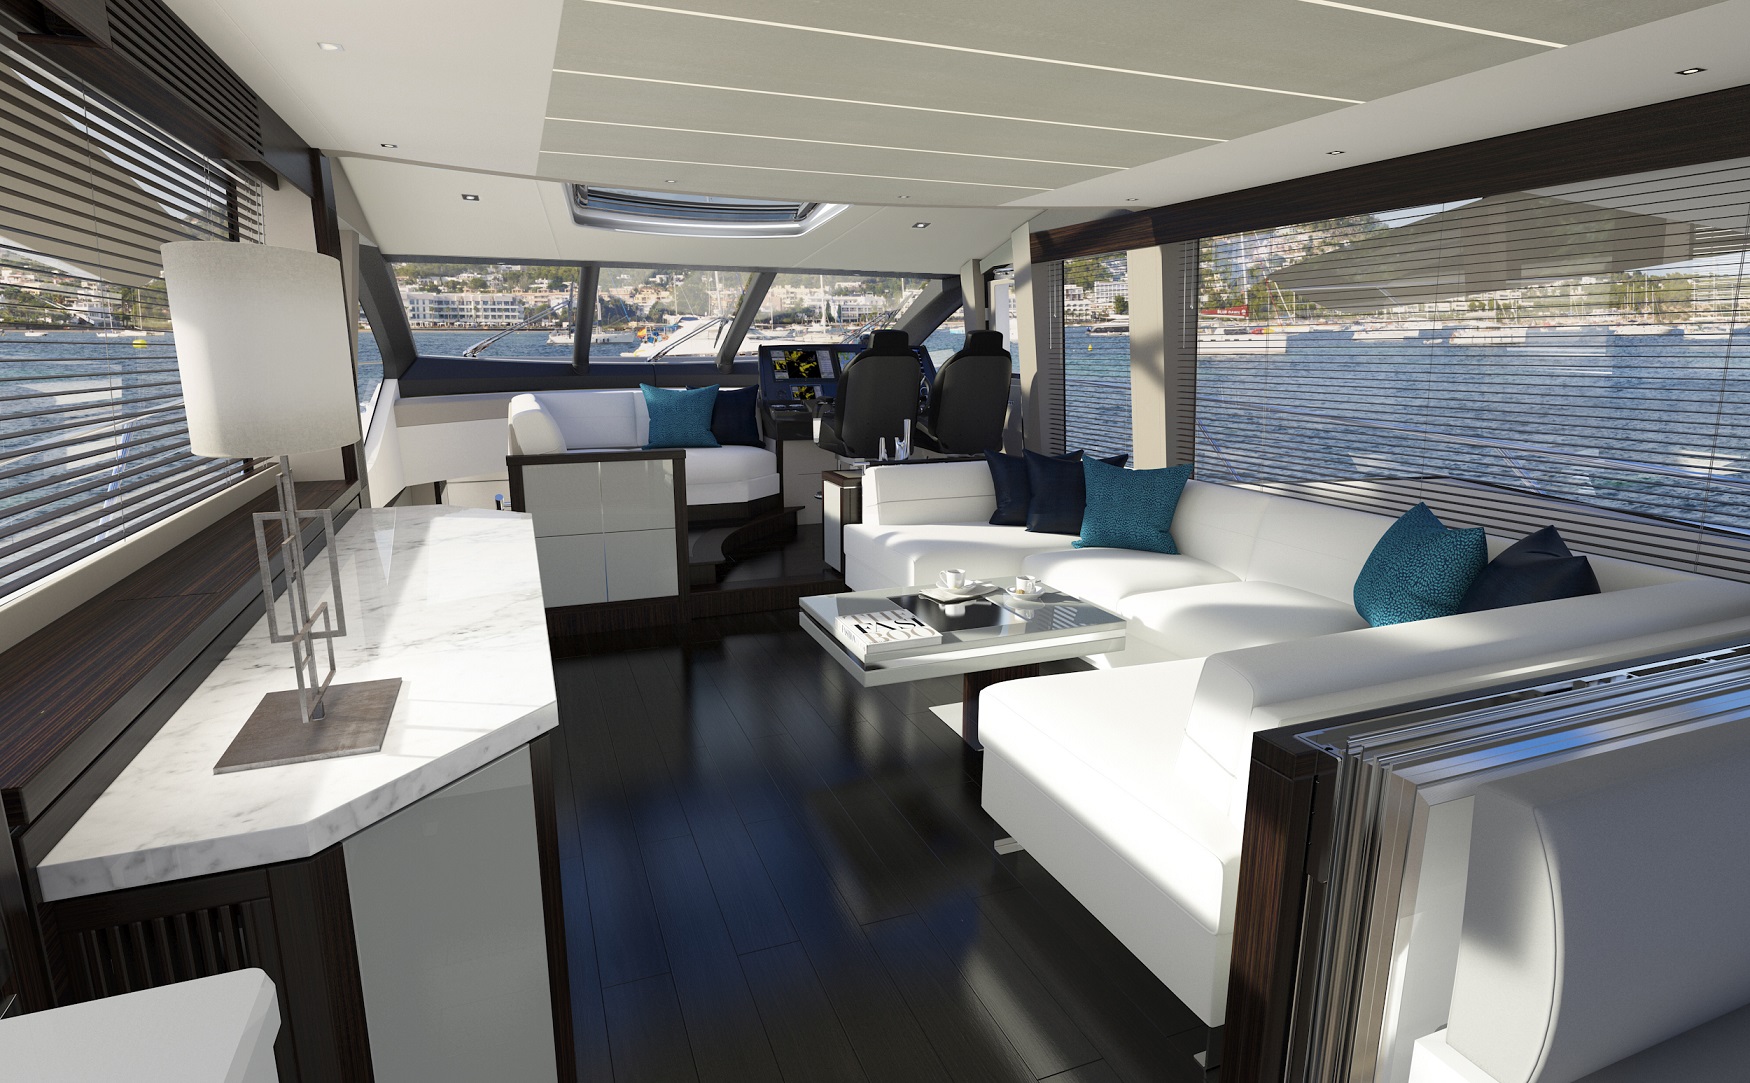 74 Sport Yacht at this year’s Cannes Yachting Festival